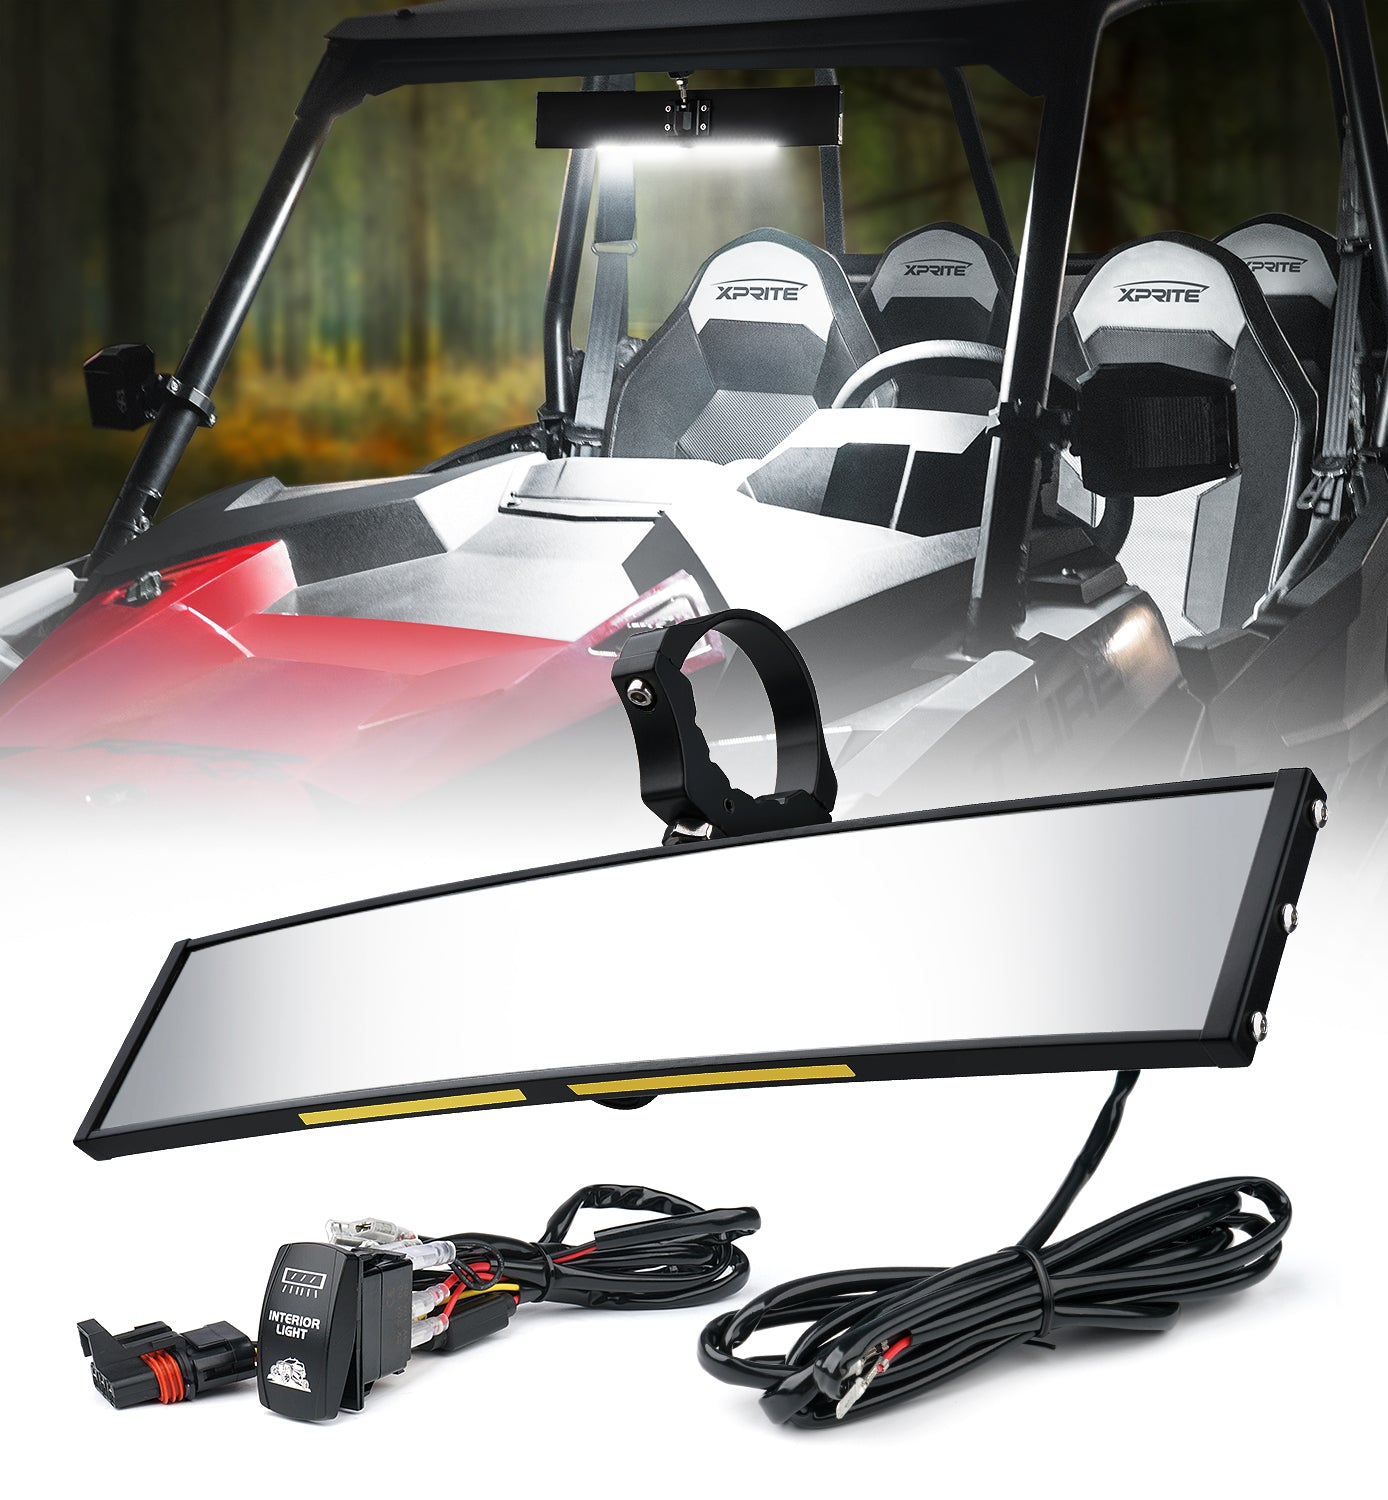 Curved UTV Rear View Mirror with LED Lights | Spirit Series